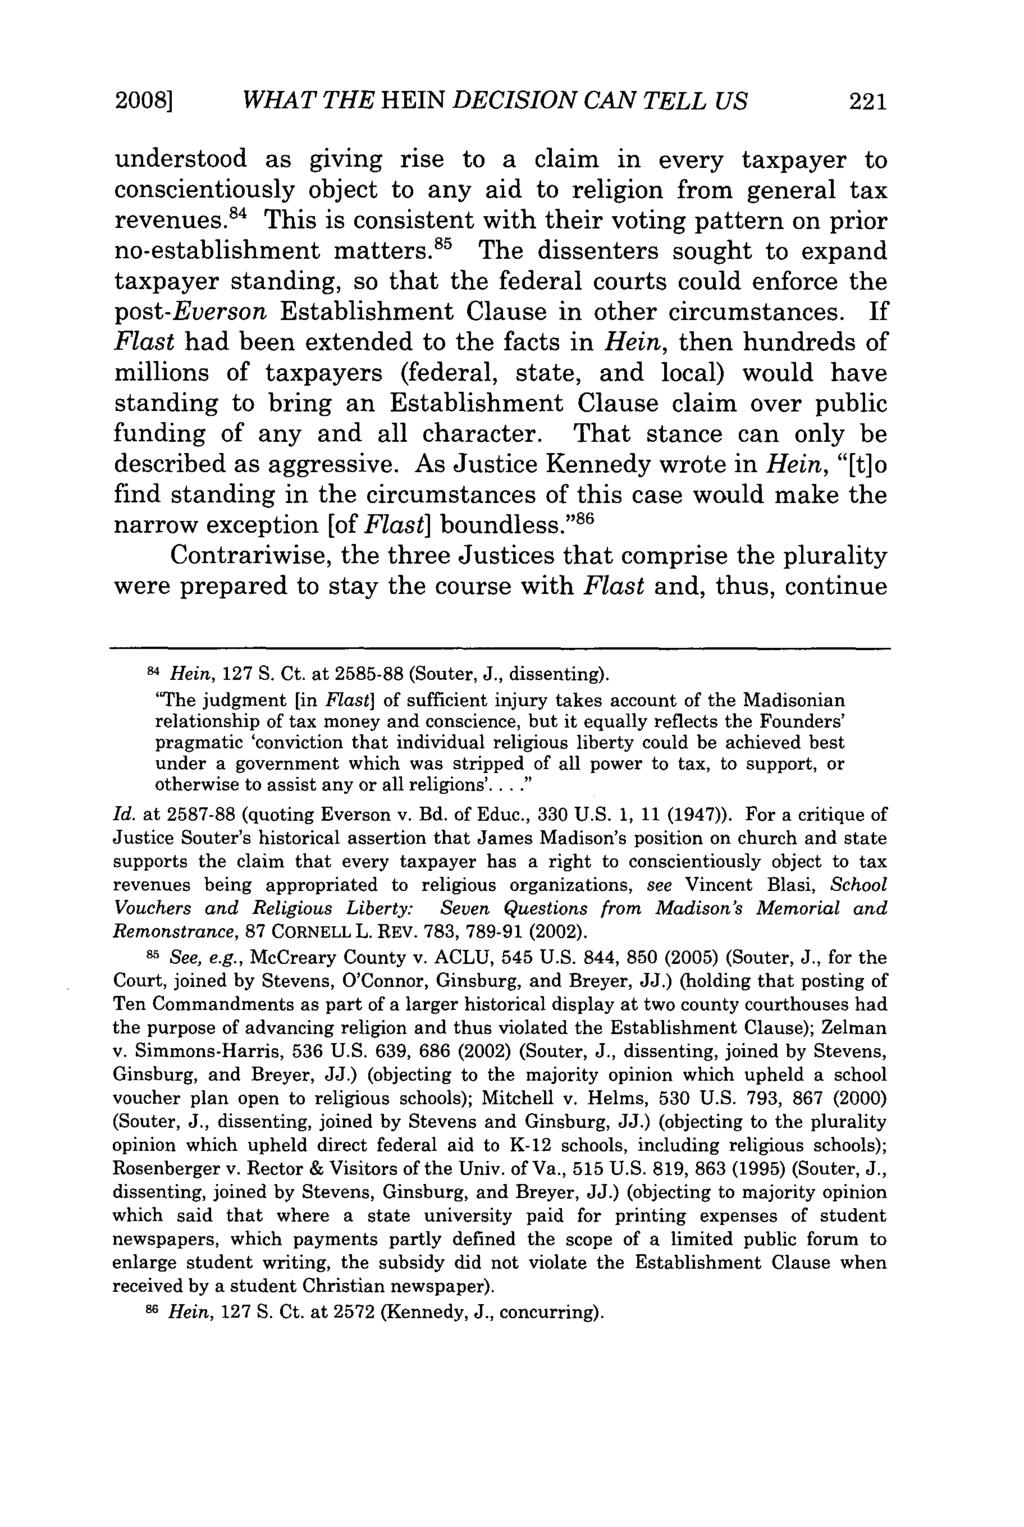 2008] WHAT THE HEIN DECISION CAN TELL US understood as giving rise to a claim in every taxpayer to conscientiously object to any aid to religion from general tax revenues.